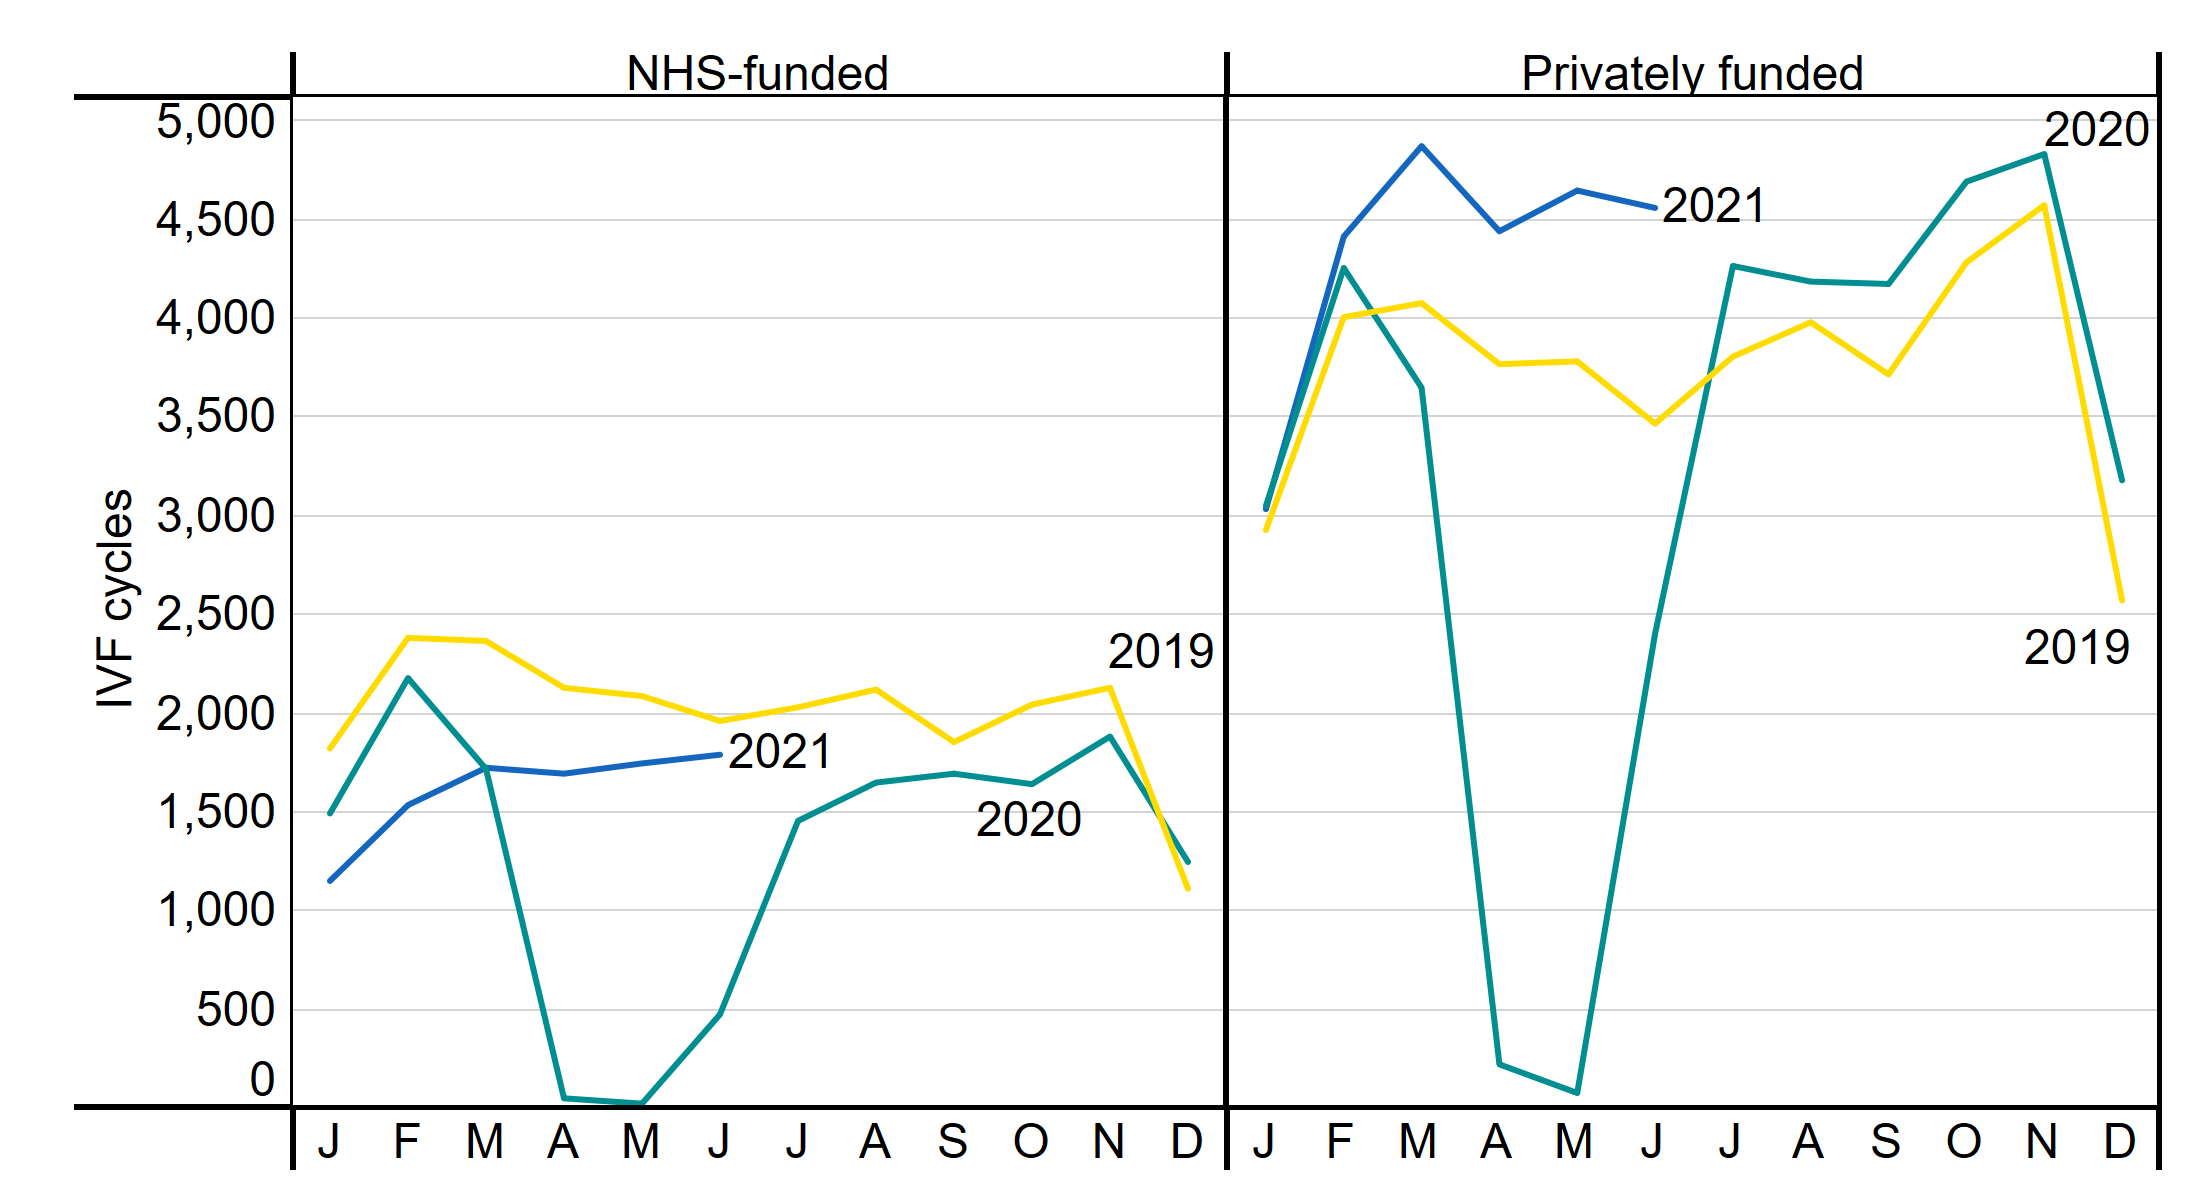 Figure1: Number of IVF cycles by month and funding, January 2019-June 2021. Number of IVF cycles by month and funding, January 2019-June 2021. This line chart shows the number of IVF cycles each month from January 2019-June 2021, and is split by NHS-funded and privately funded treatments. Both NHS and privately funded treatments decreased in April 2020 (during suspension of fertility treatments). NHS-funded cycles recovered slower than private, with NHS-funded 2021 cycles remaining lower than 2019 data. An accessible form of the underlying data for this figure can be downloaded at the start of the report in .xls format.